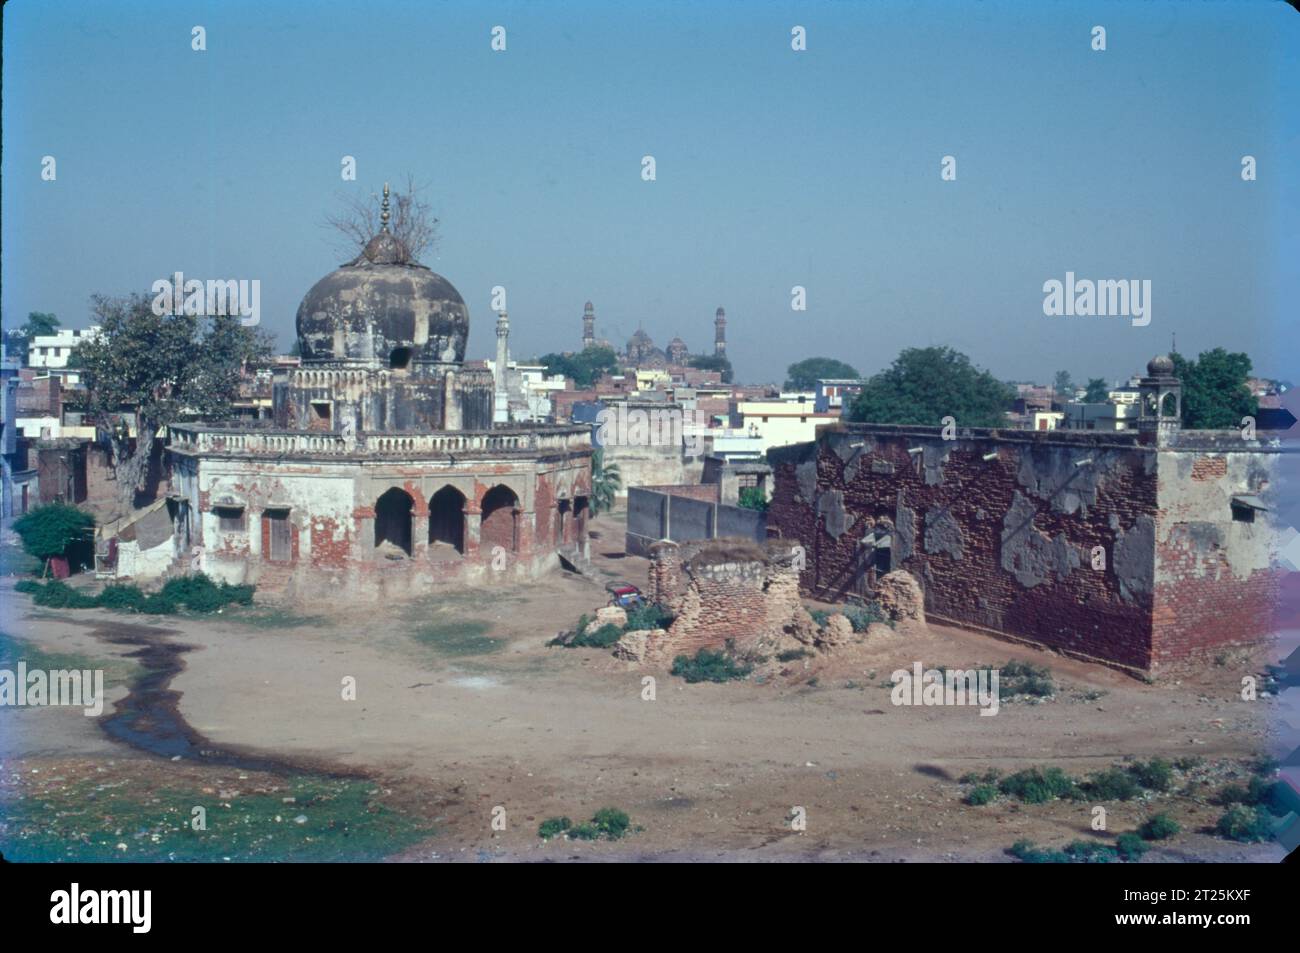 The Lucknow Residency is a witness of the First war of Independence in 1857. Lying to south of Gomti river its roofless buildings and smashed walls sprawling in a vast area of 33 acres stands witness to one of the most memorable siege of this British stronghold by the Avadh forces in 1857. Stock Photo